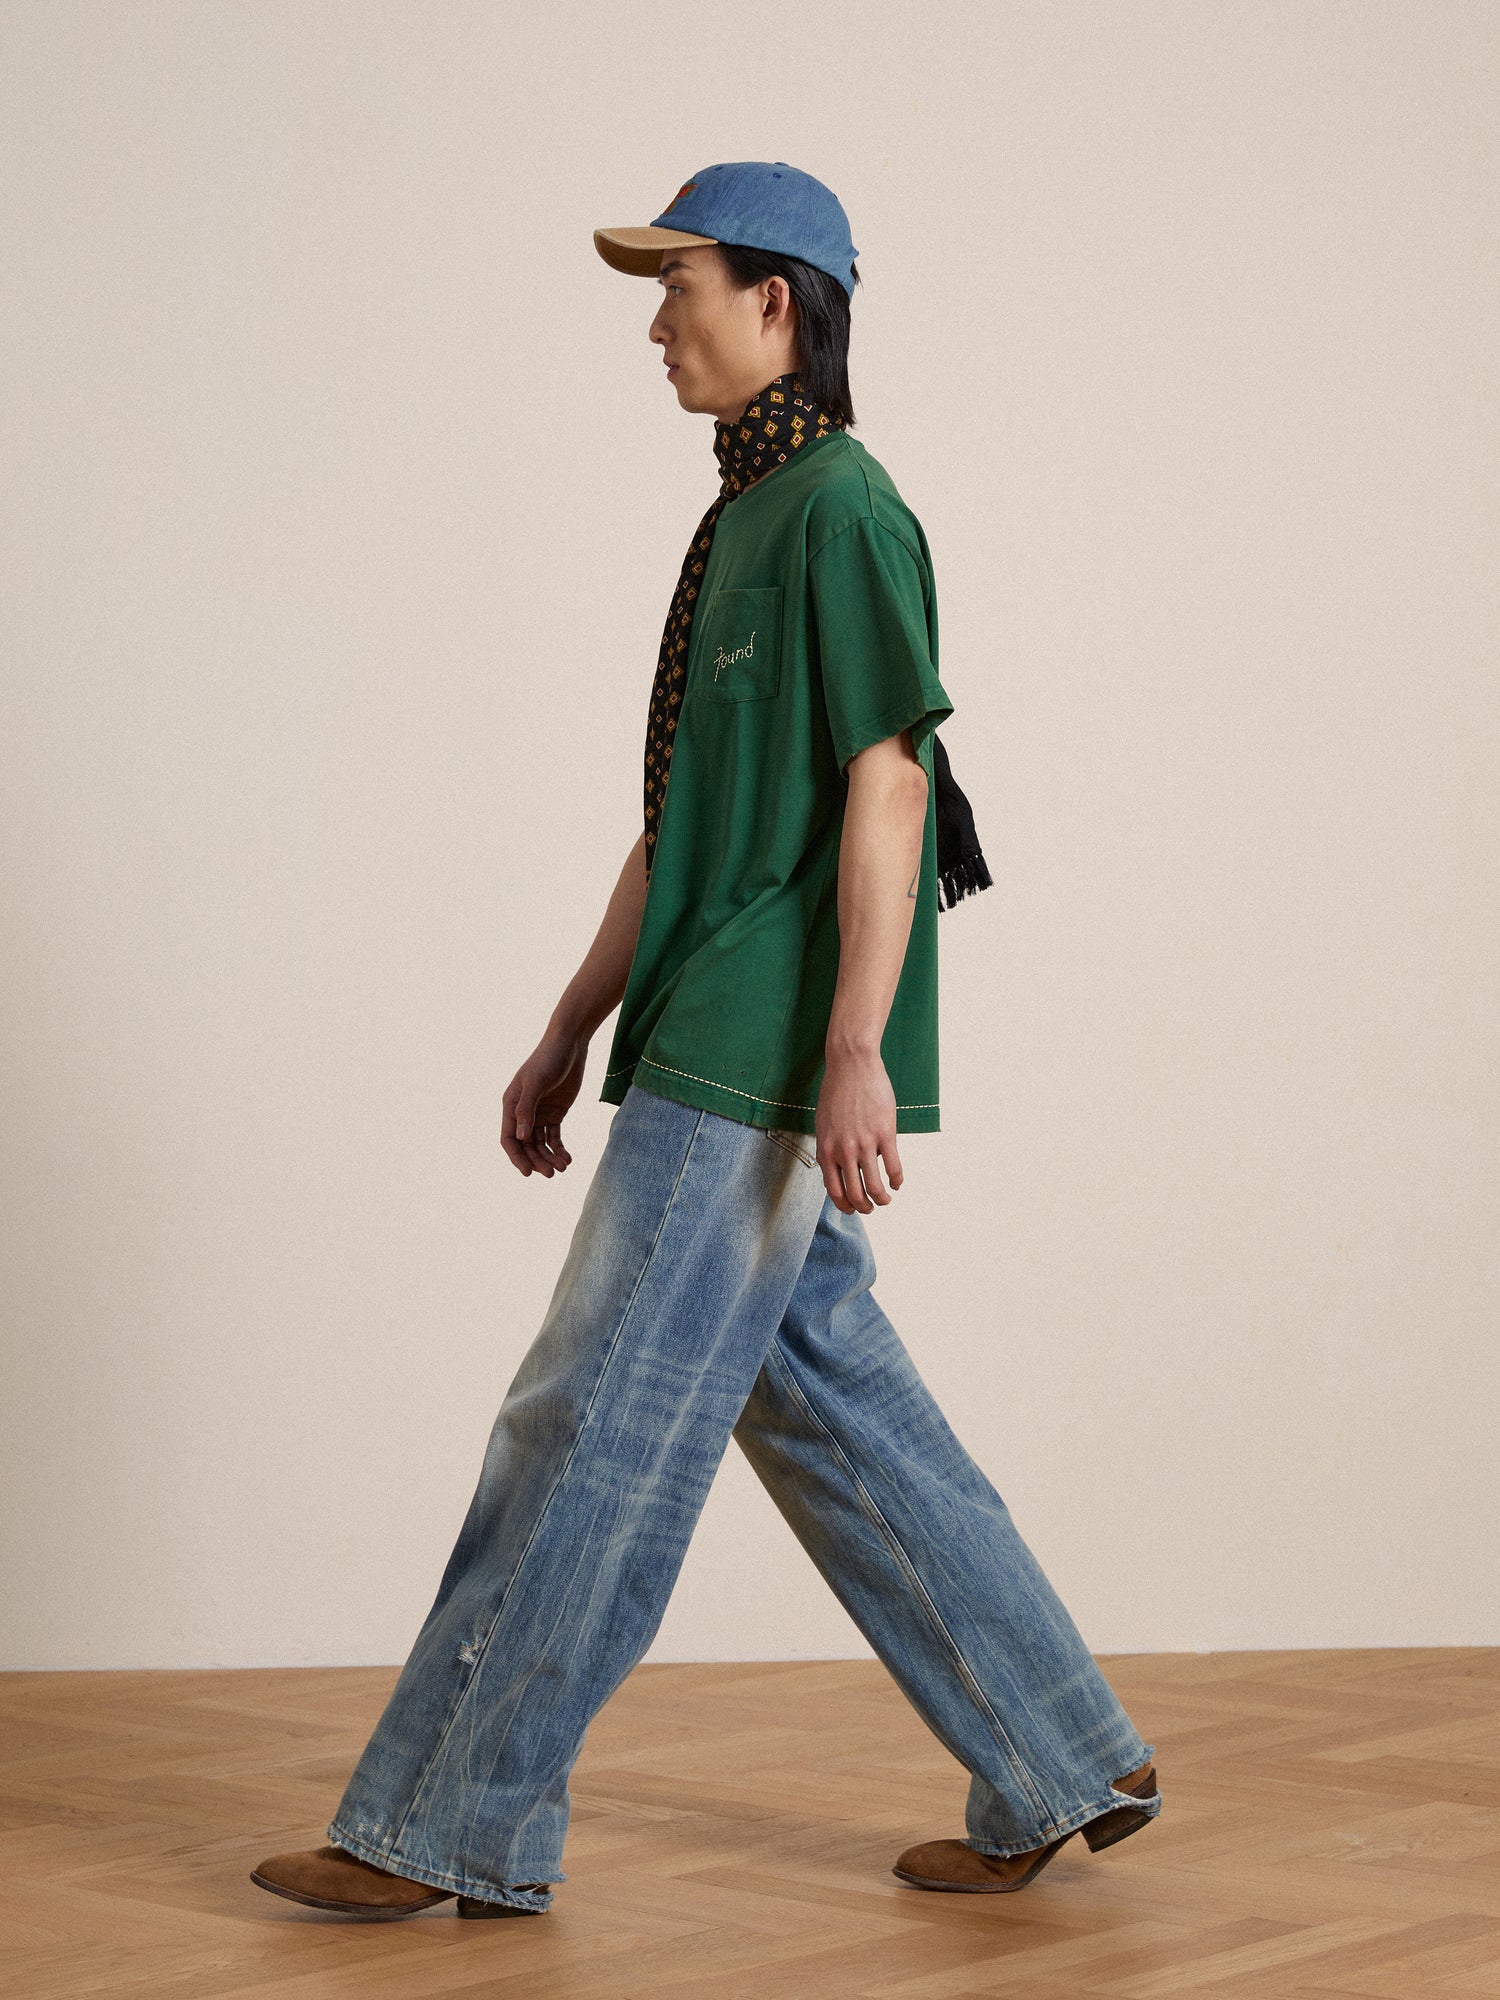 A man in a green Found Embroidered Logo Tee and blue baggy jeans walking on a wooden floor.